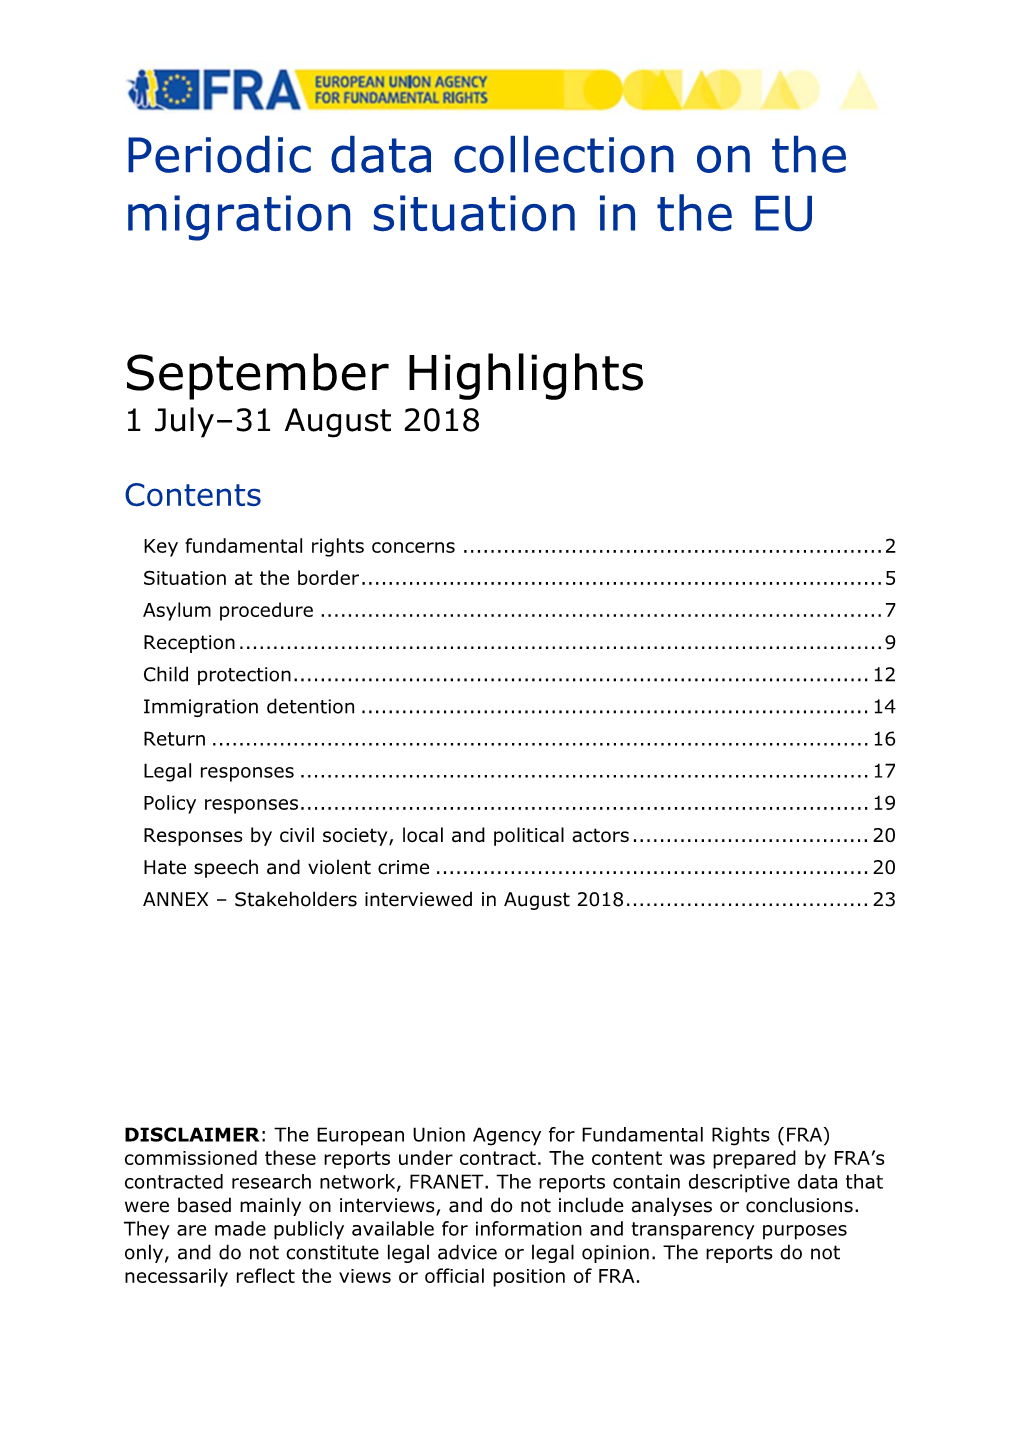 Periodic Data Collection on the Migration Situation in the EU